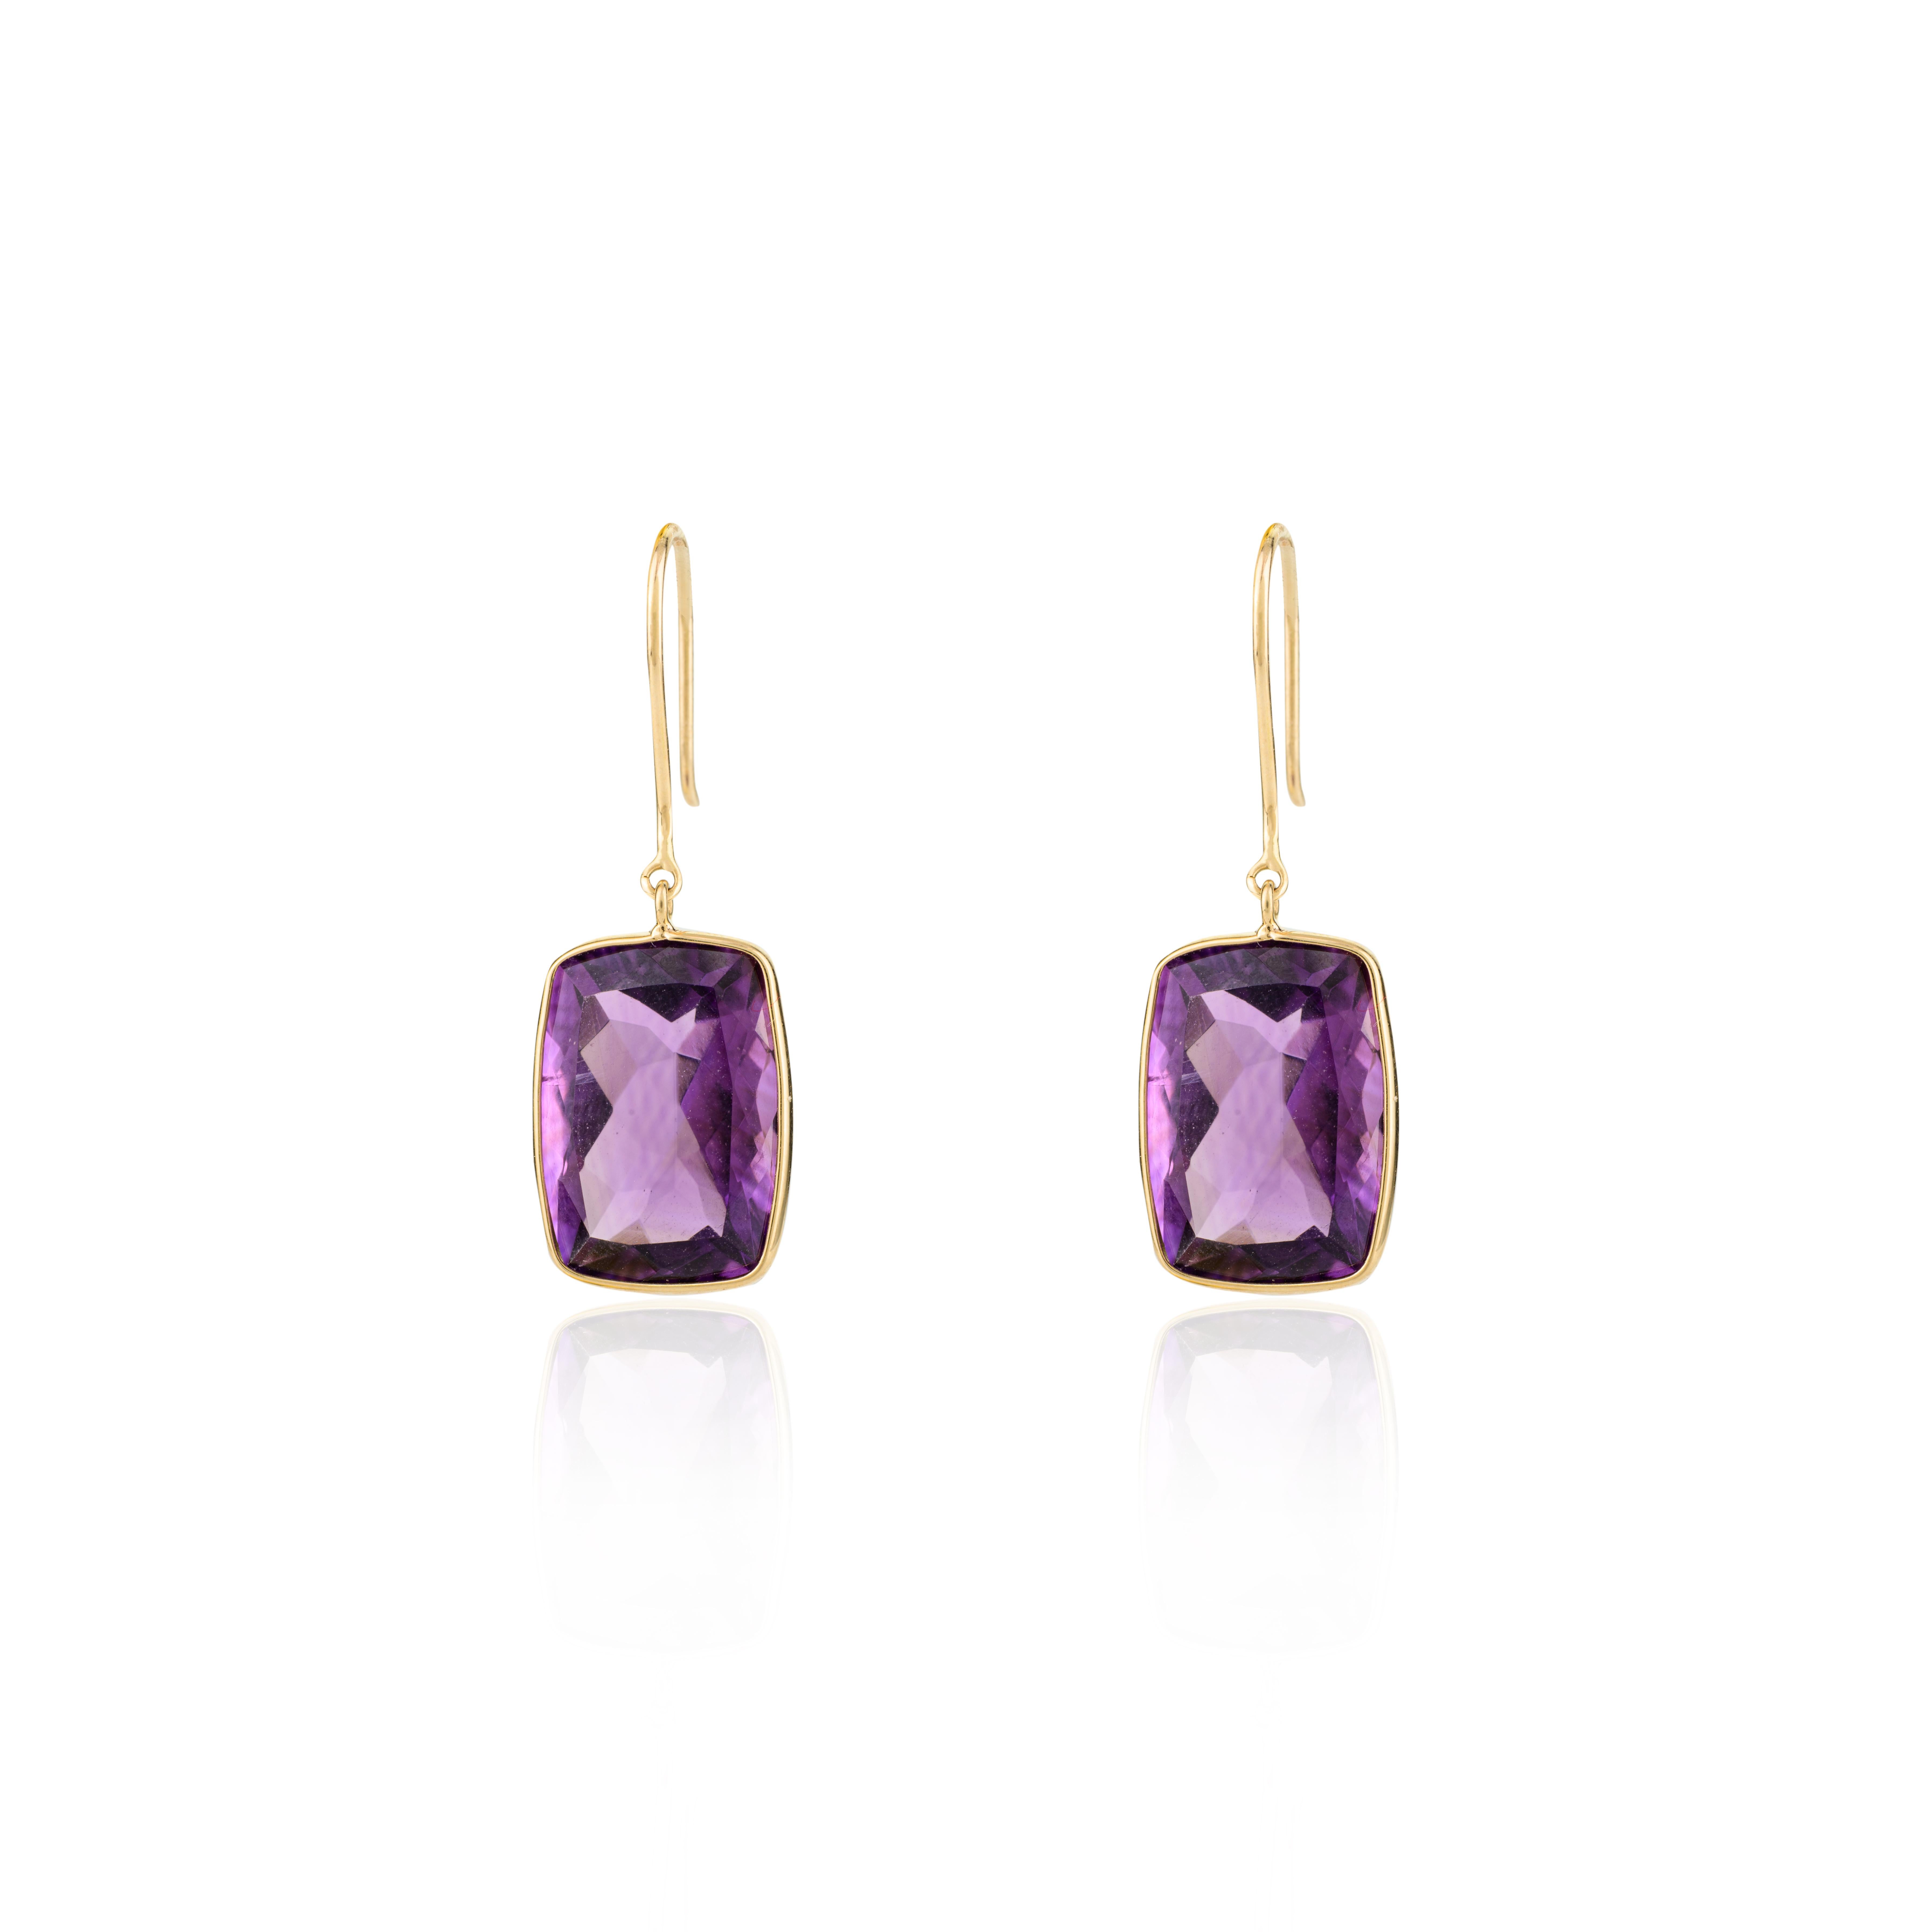 Art Deco Handmade Amethyst Drop Earrings Gift for Mom in 18k Solid Yellow Gold For Sale